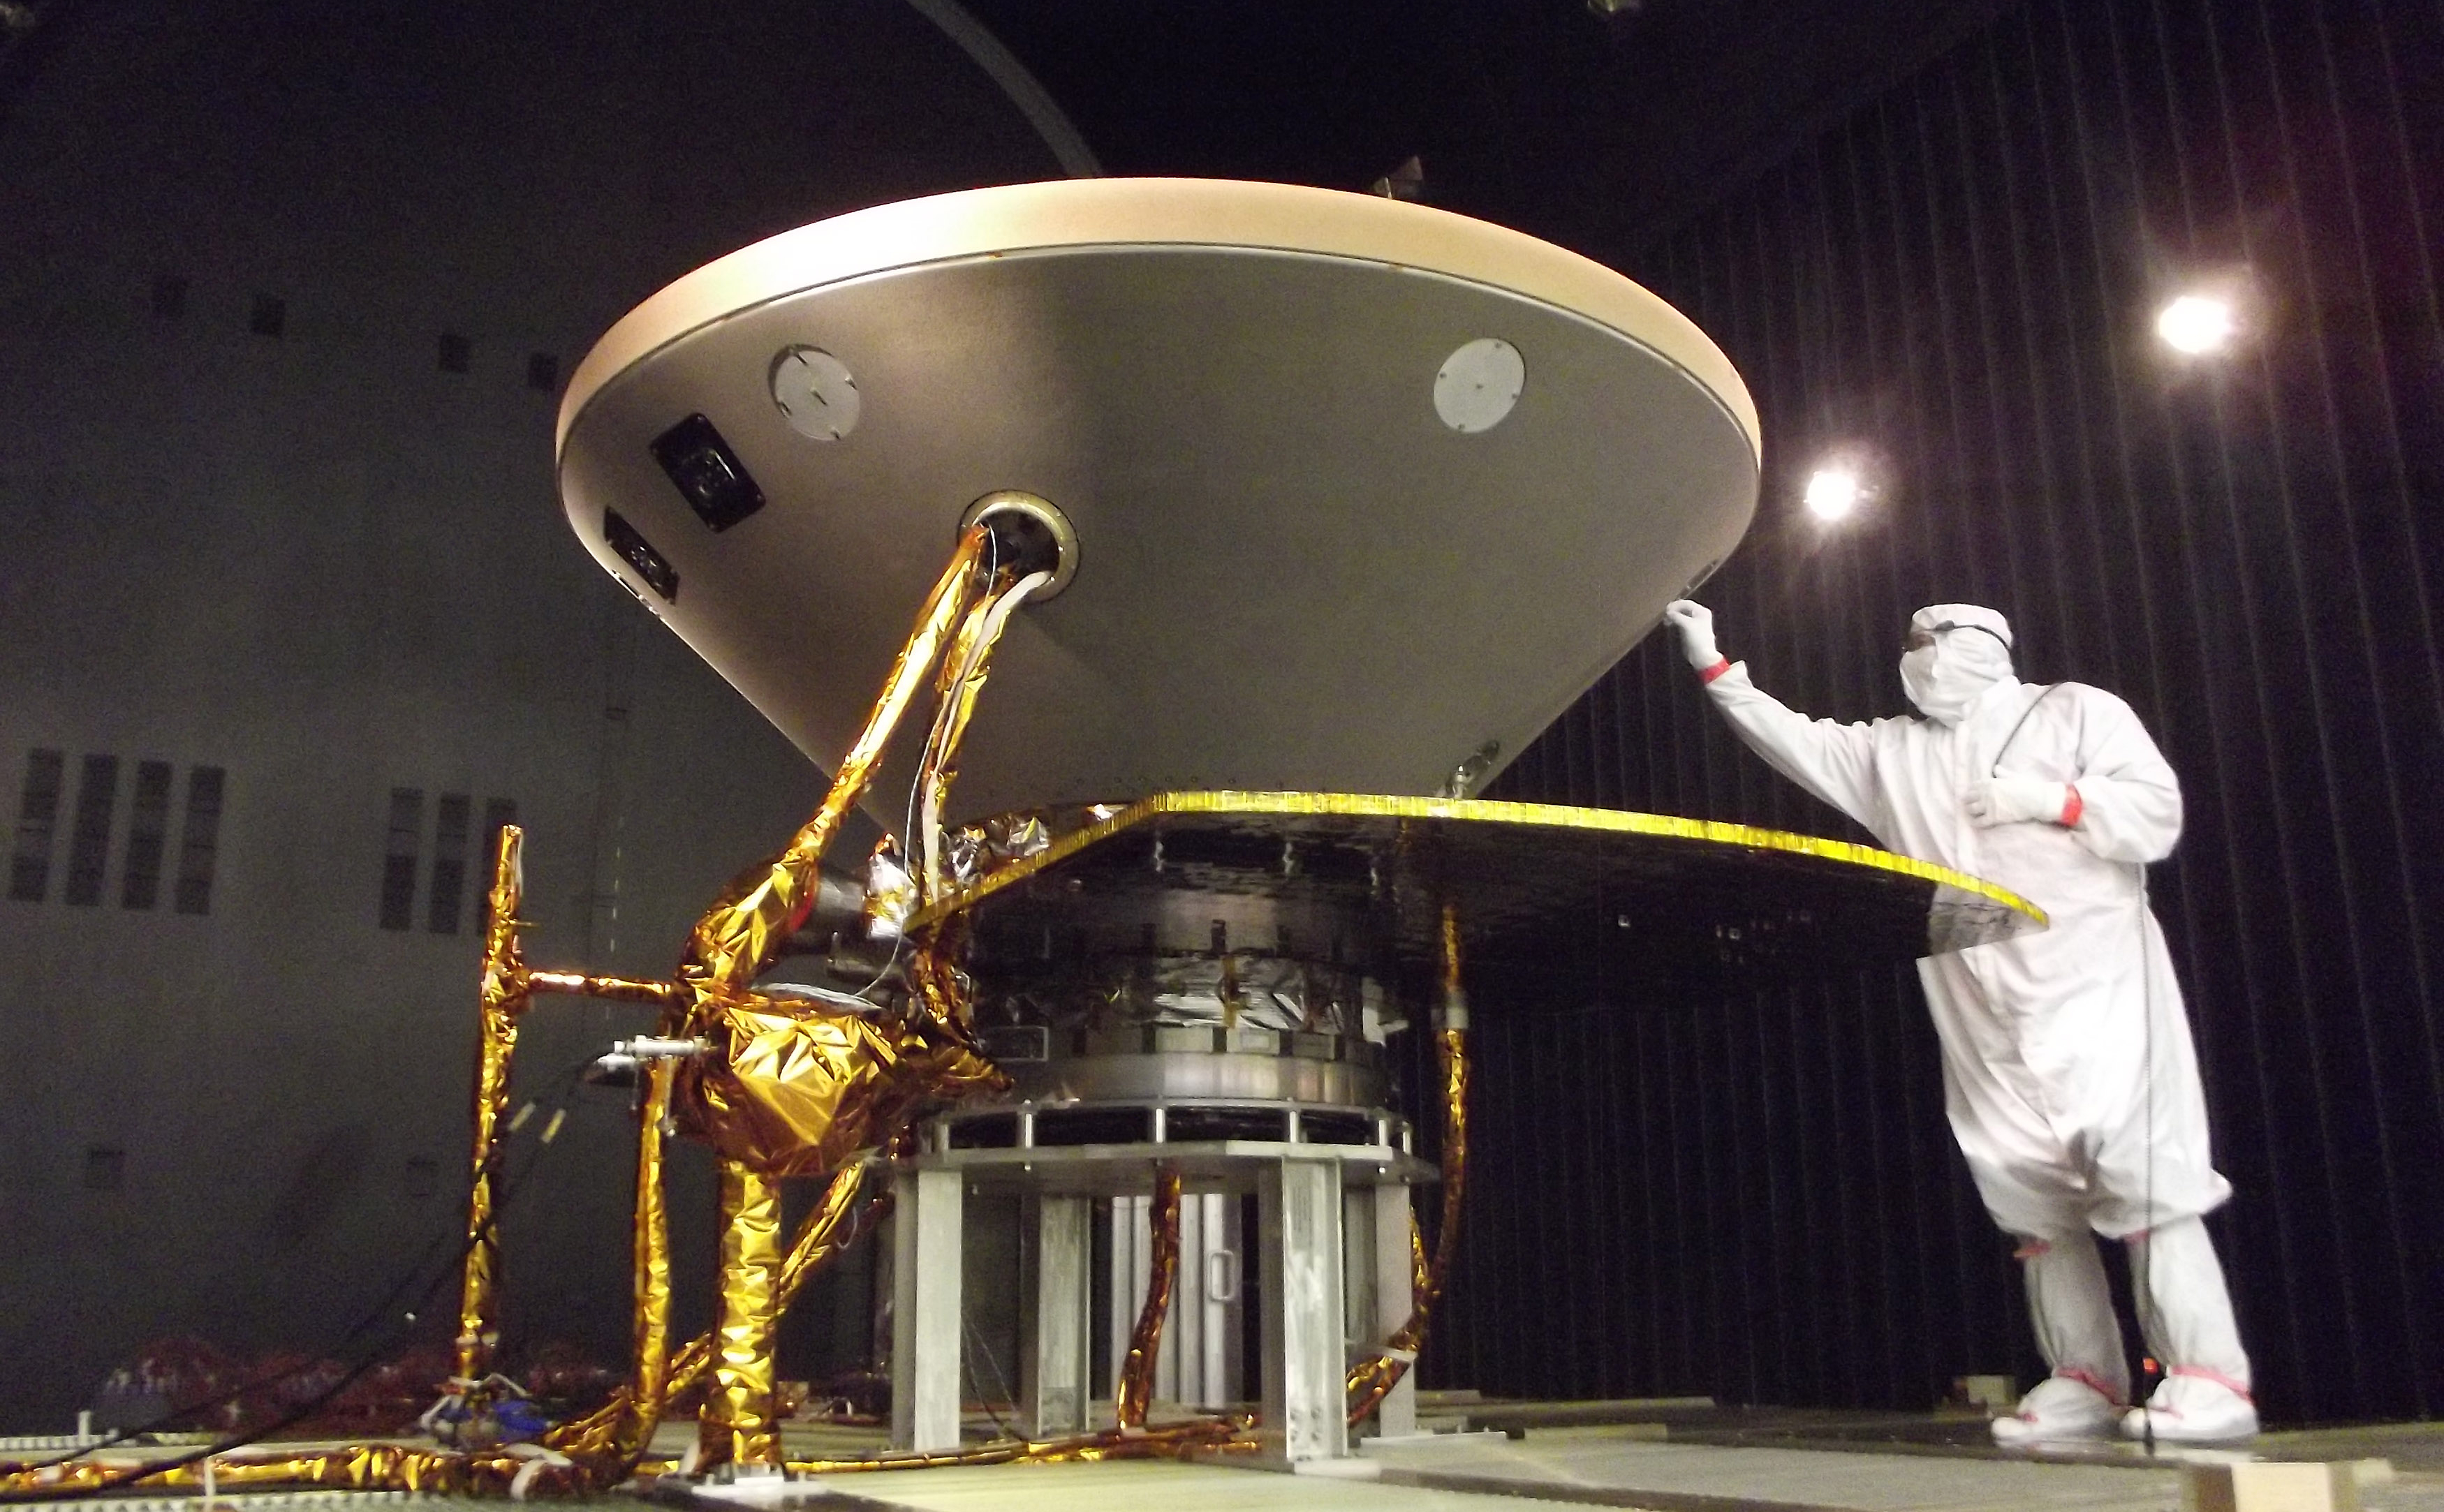 In this photo, a spacecraft specialist prepares NASA's InSight spacecraft for thermal vacuum testing in the flight system's "cruise" configuration for its 2016 flight to Mars.